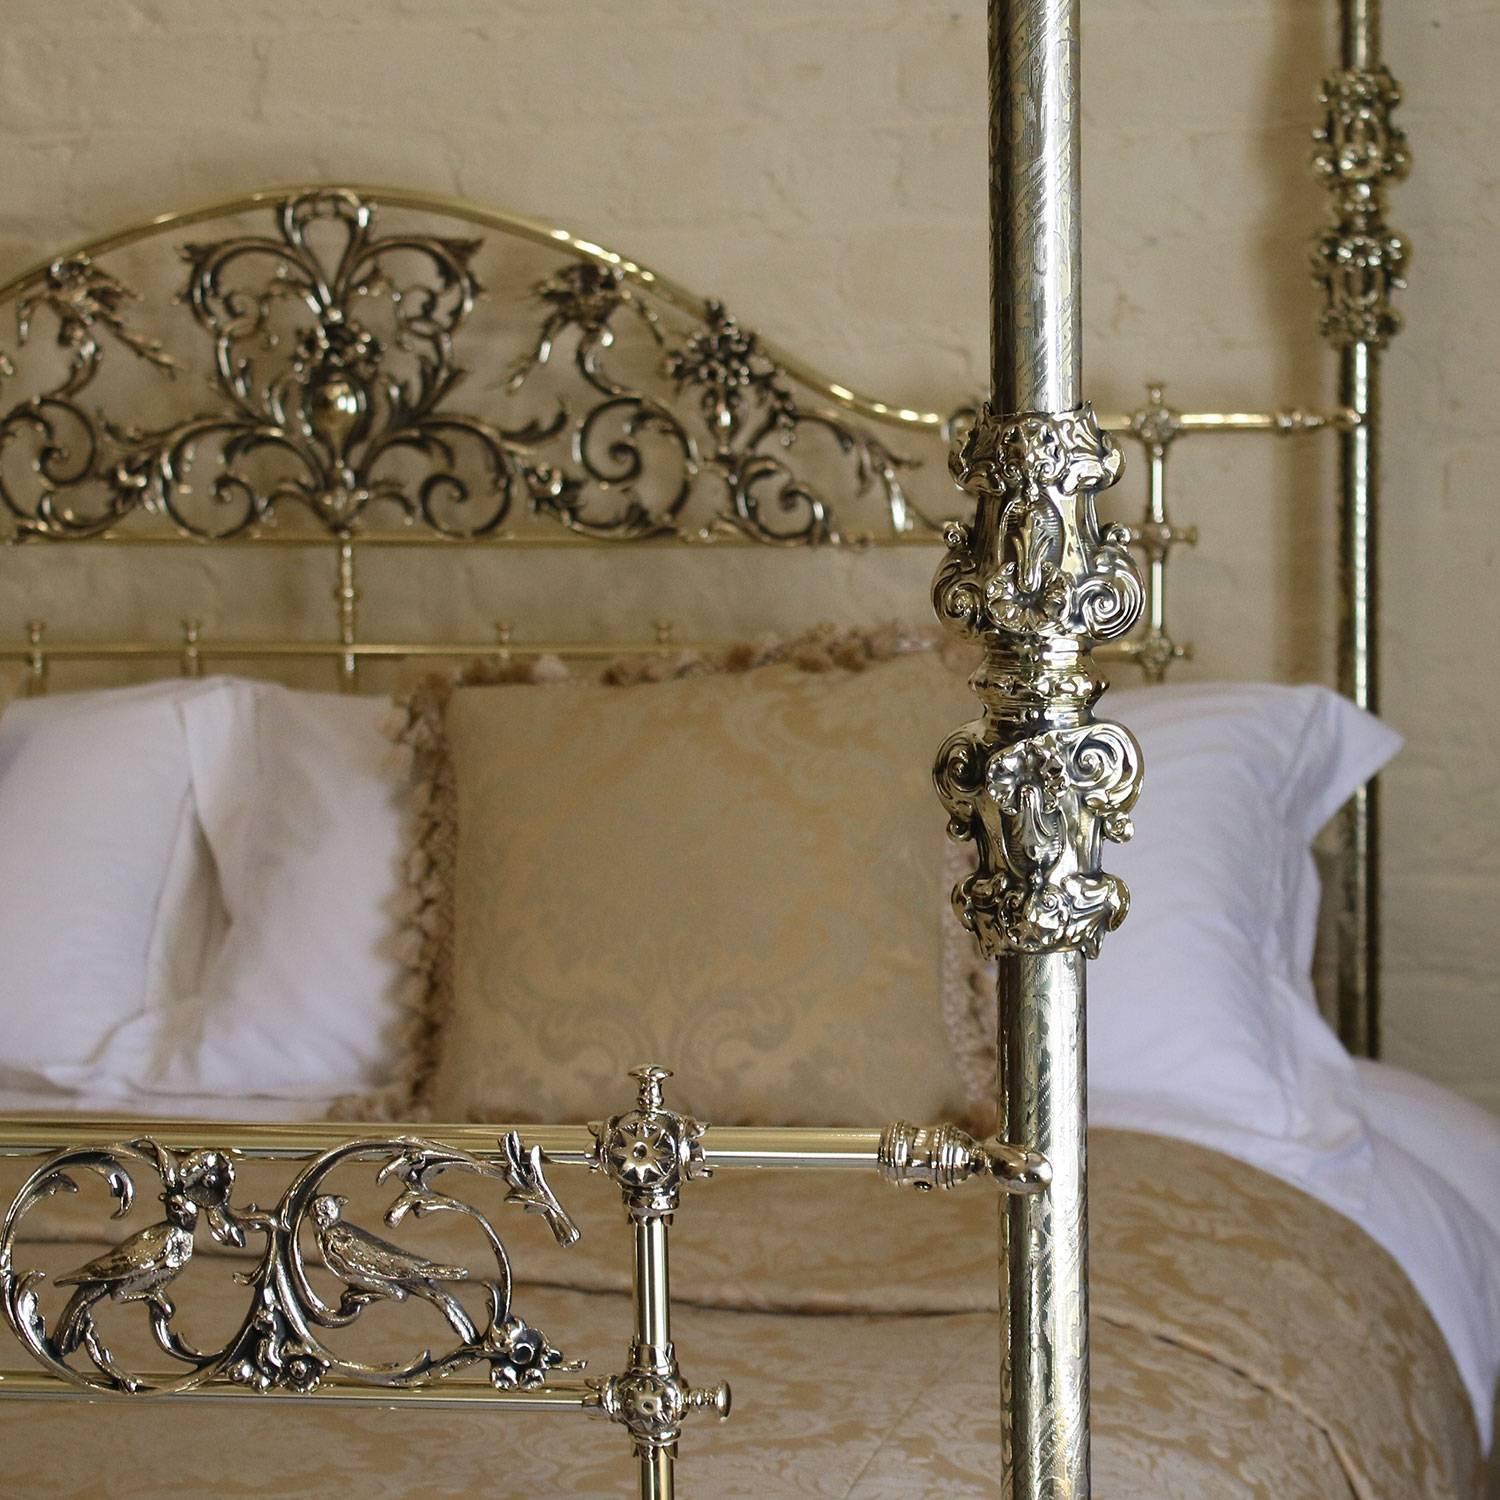 A magnificent all brass four-poster bed with etched posts, ornate brass fittings, decorative brass knee-caps, delicate castings depicting song birds and serpentine canopy with brass crown.

This superb four-poster bed was originally manufactured